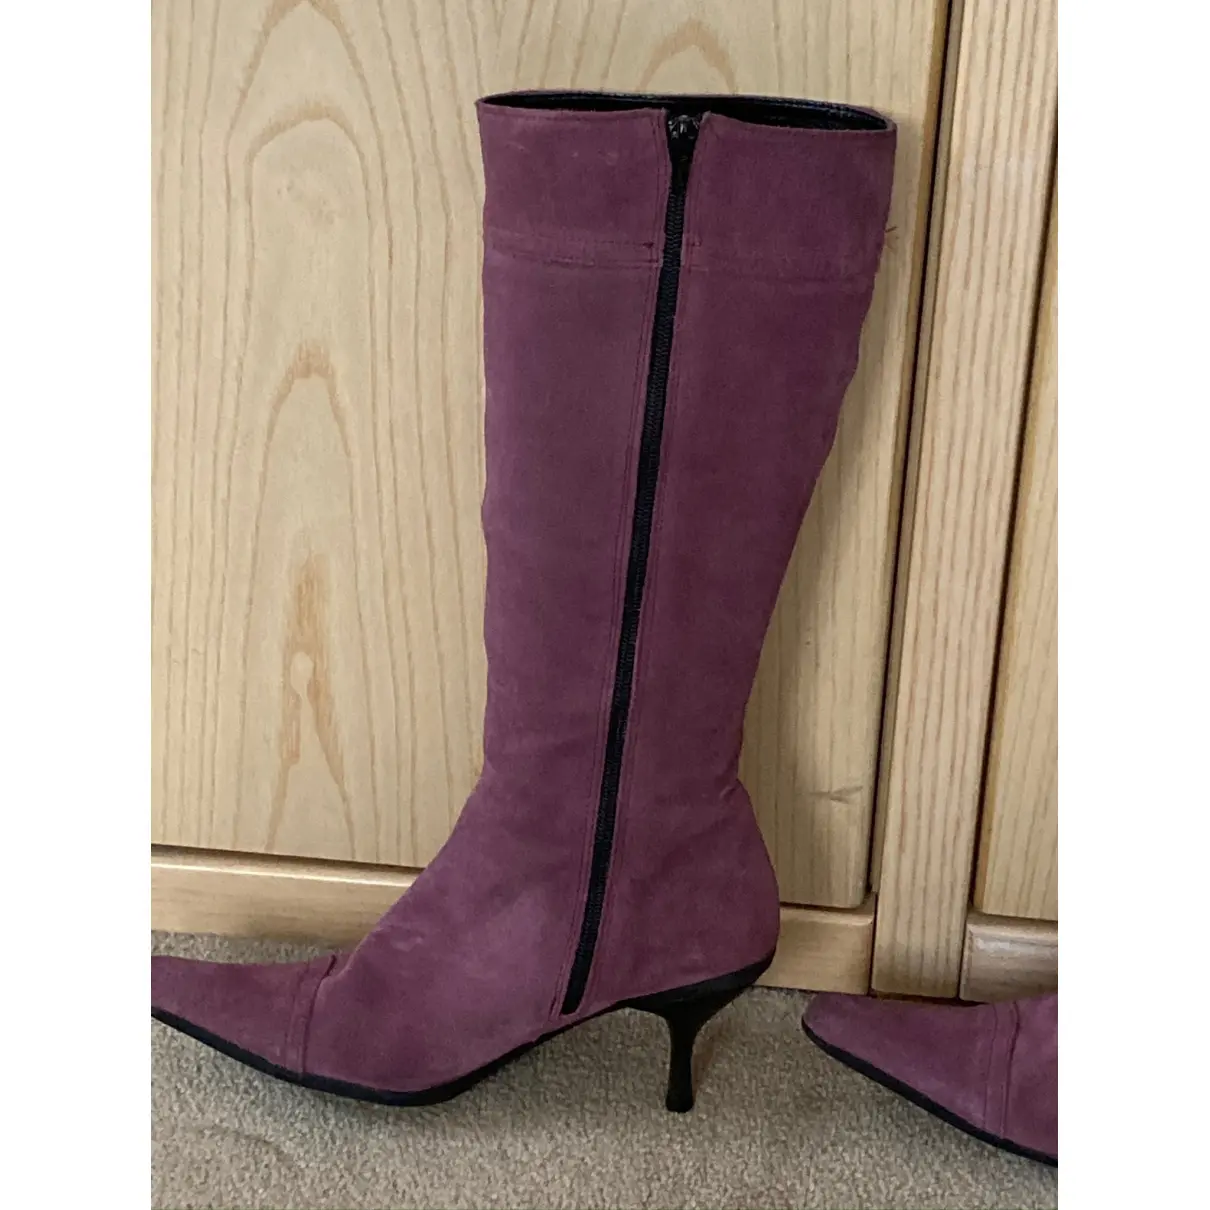 Buy Russell & Bromley Boots online - Vintage